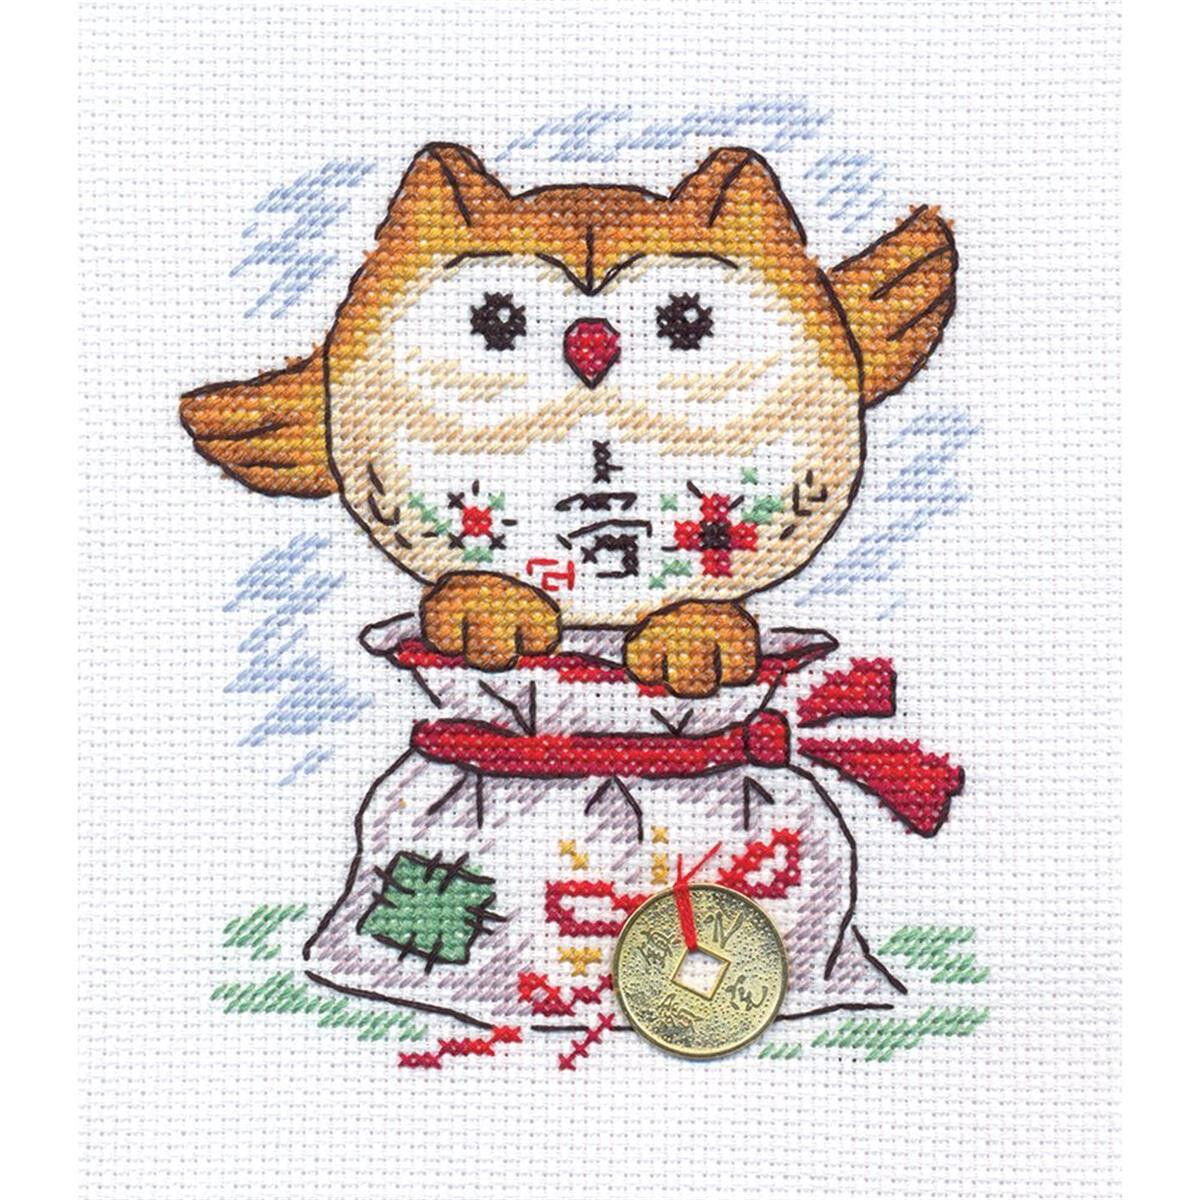 Panna counted cross stitch kit "A Little Bag of...